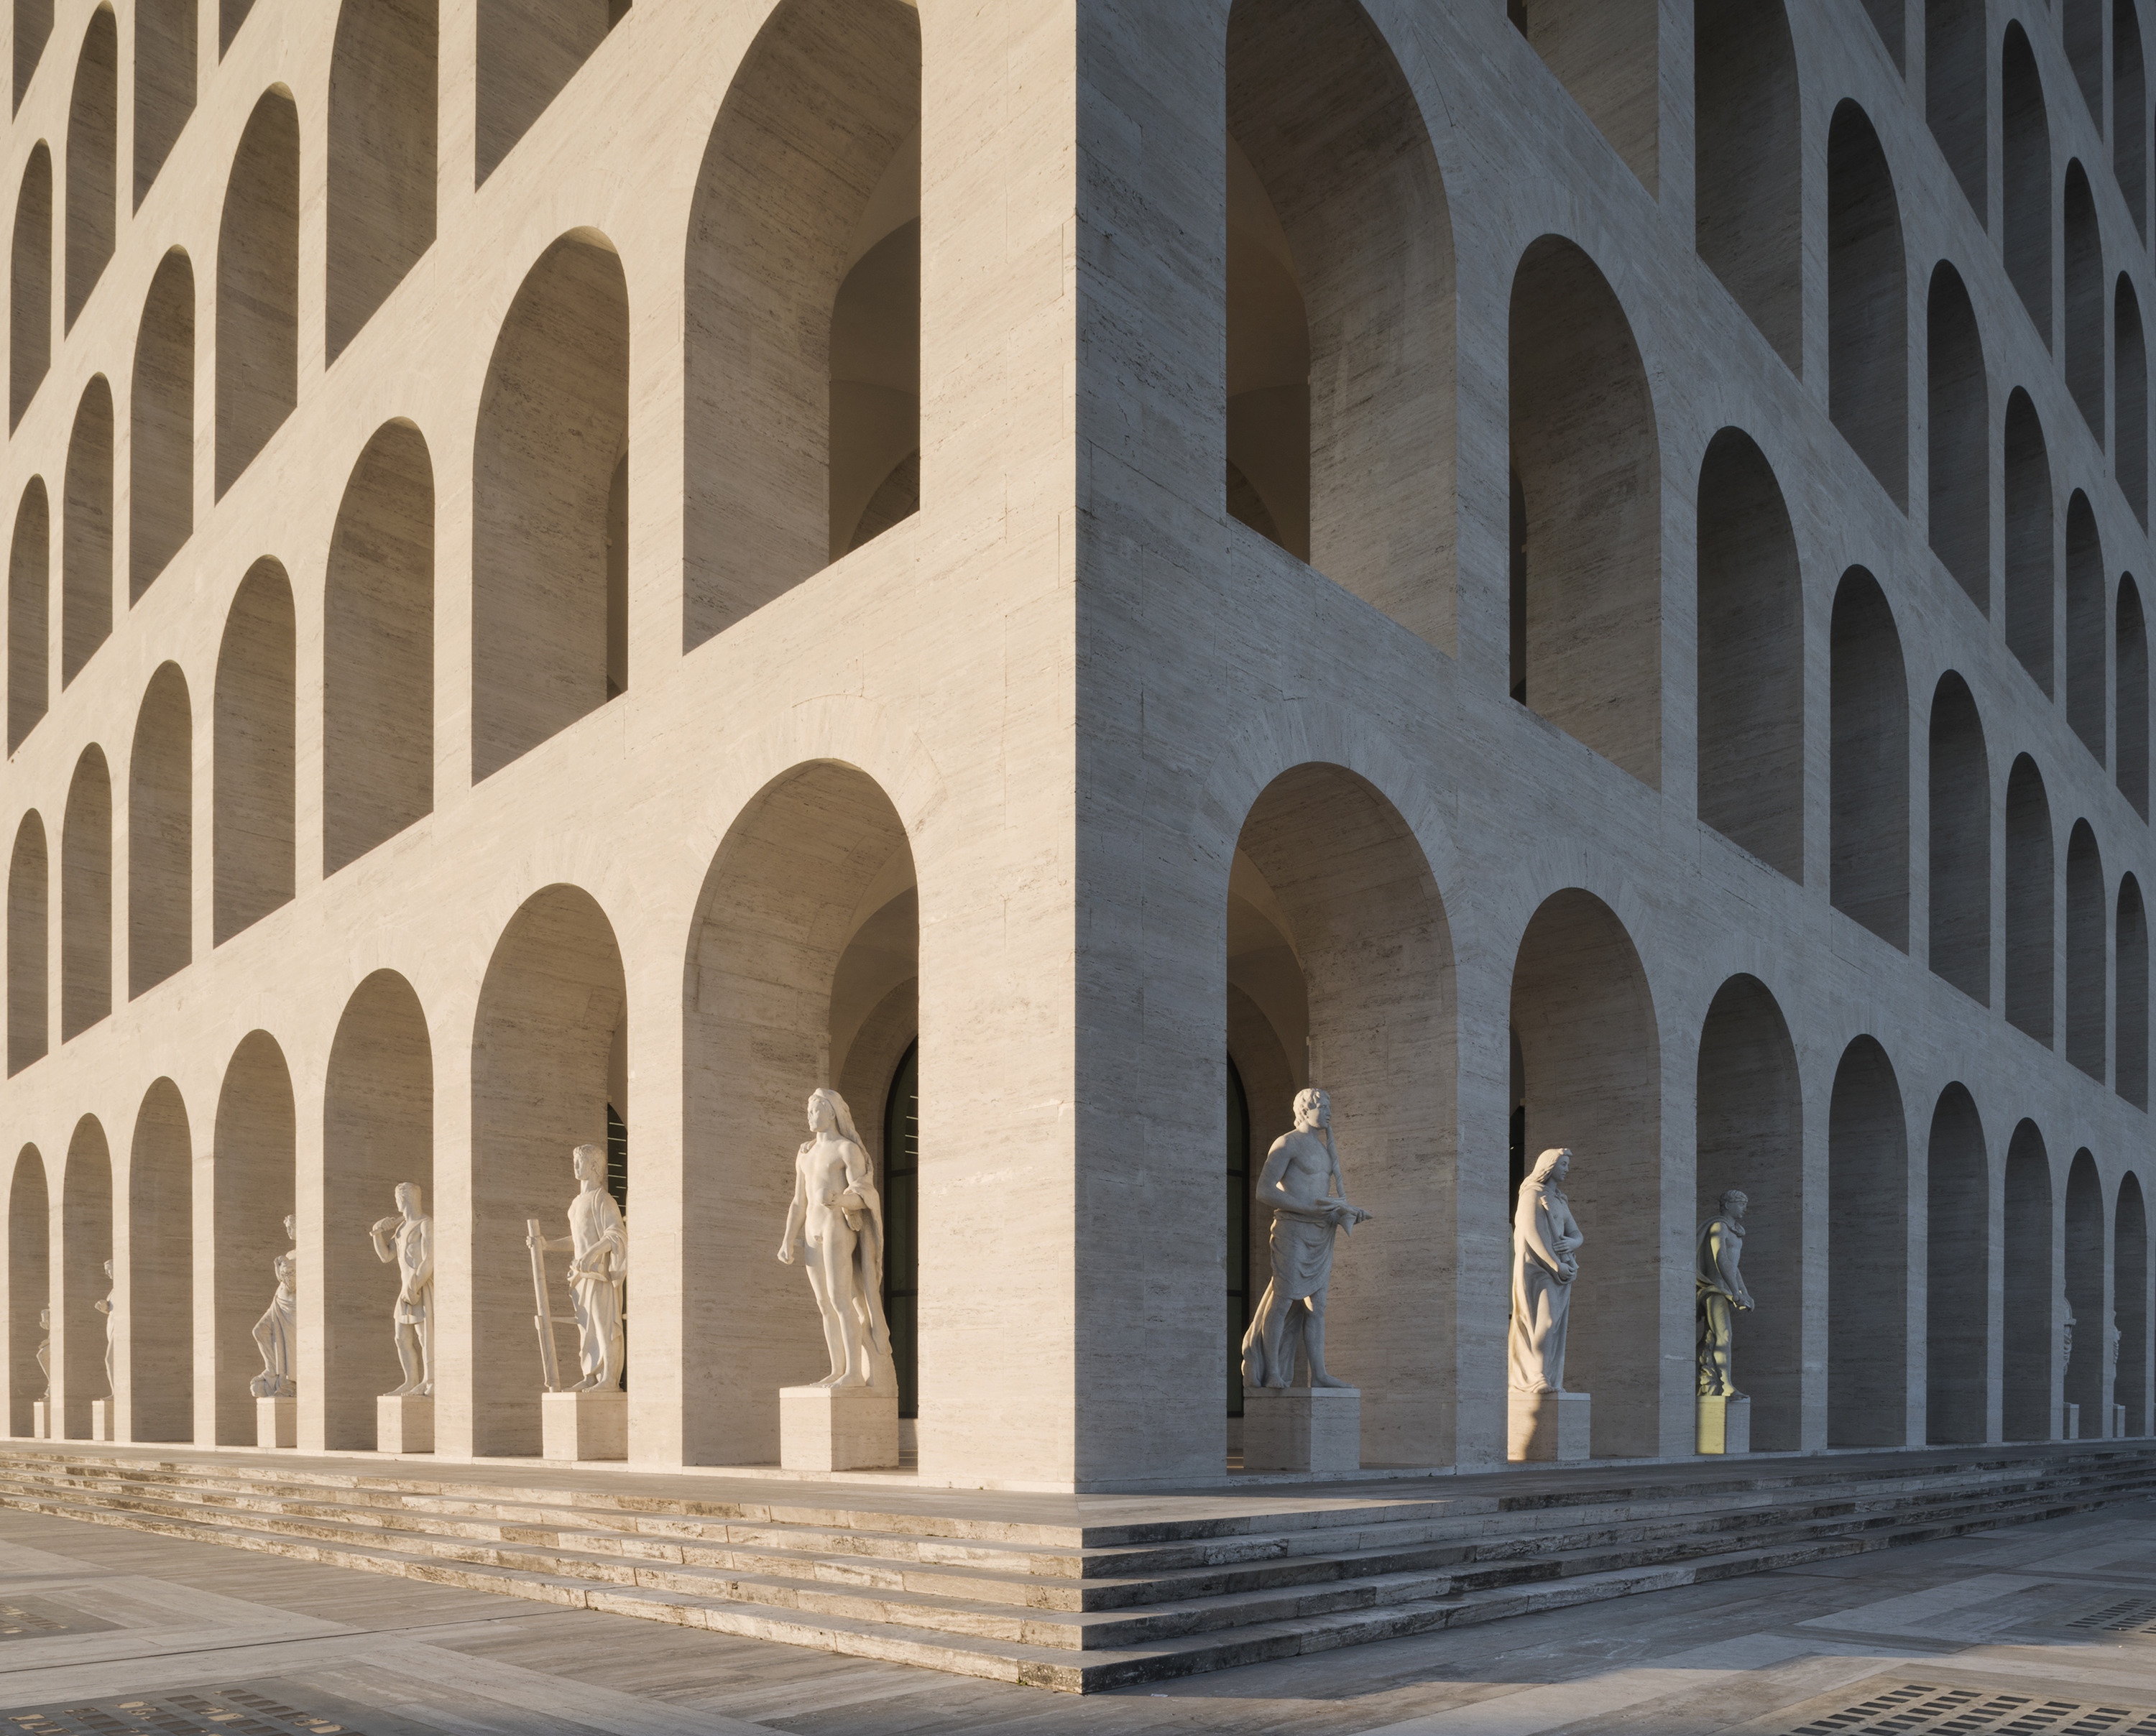 Pin by Acvisual on project 3 | Italian architecture, Architecture ...